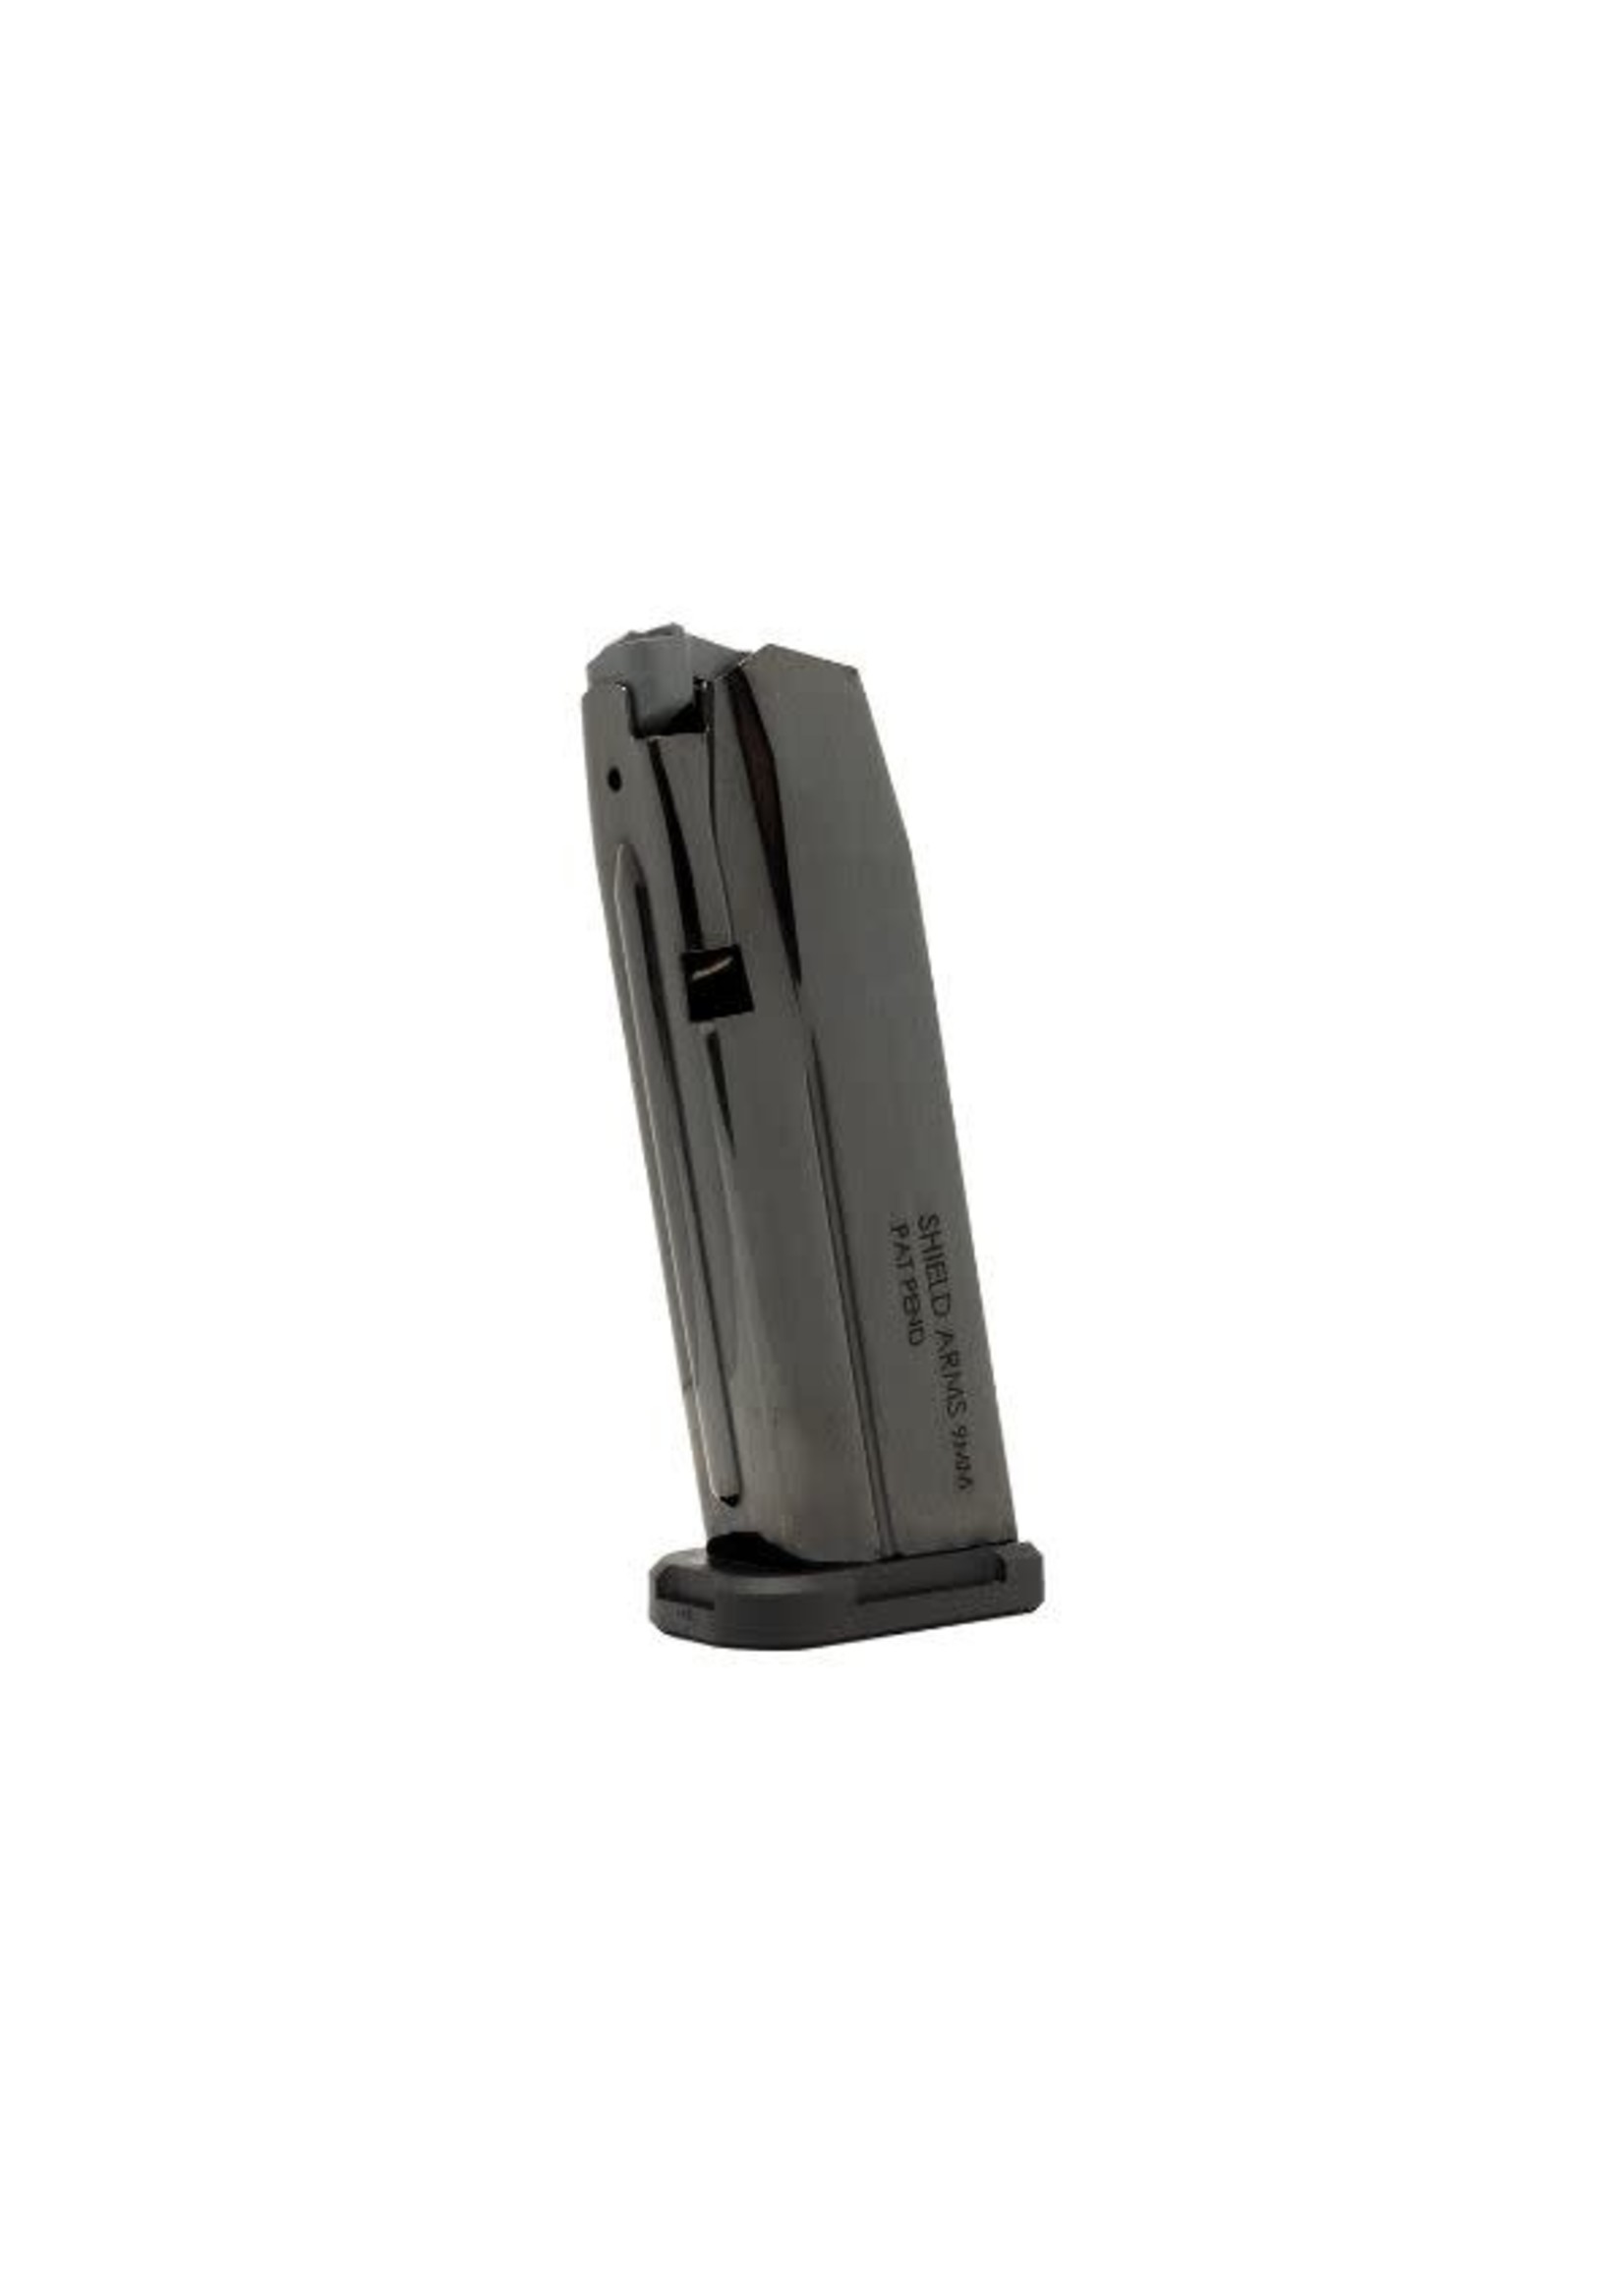 SHIELD ARMS SHIELD ARMS S15 15rd GLOCK 43X/48 MAG